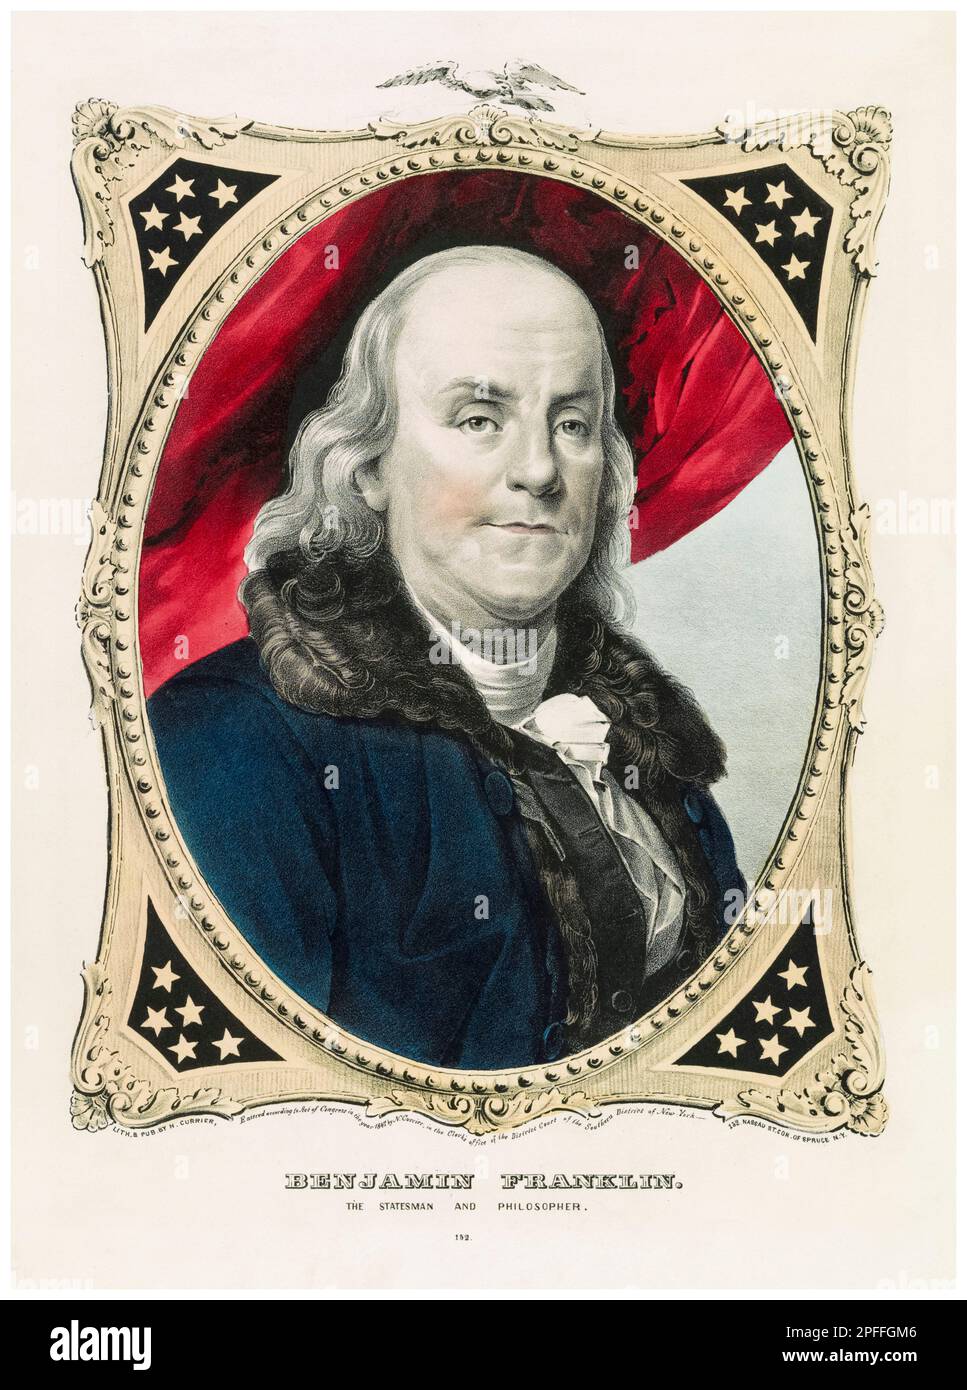 Benjamin Franklin (1706-1790), American polymath, writer, scientist, inventor, and statesman. One of the Founding Fathers of the United States, hand coloured portrait print by Currier & Ives, 1847 Stock Photo